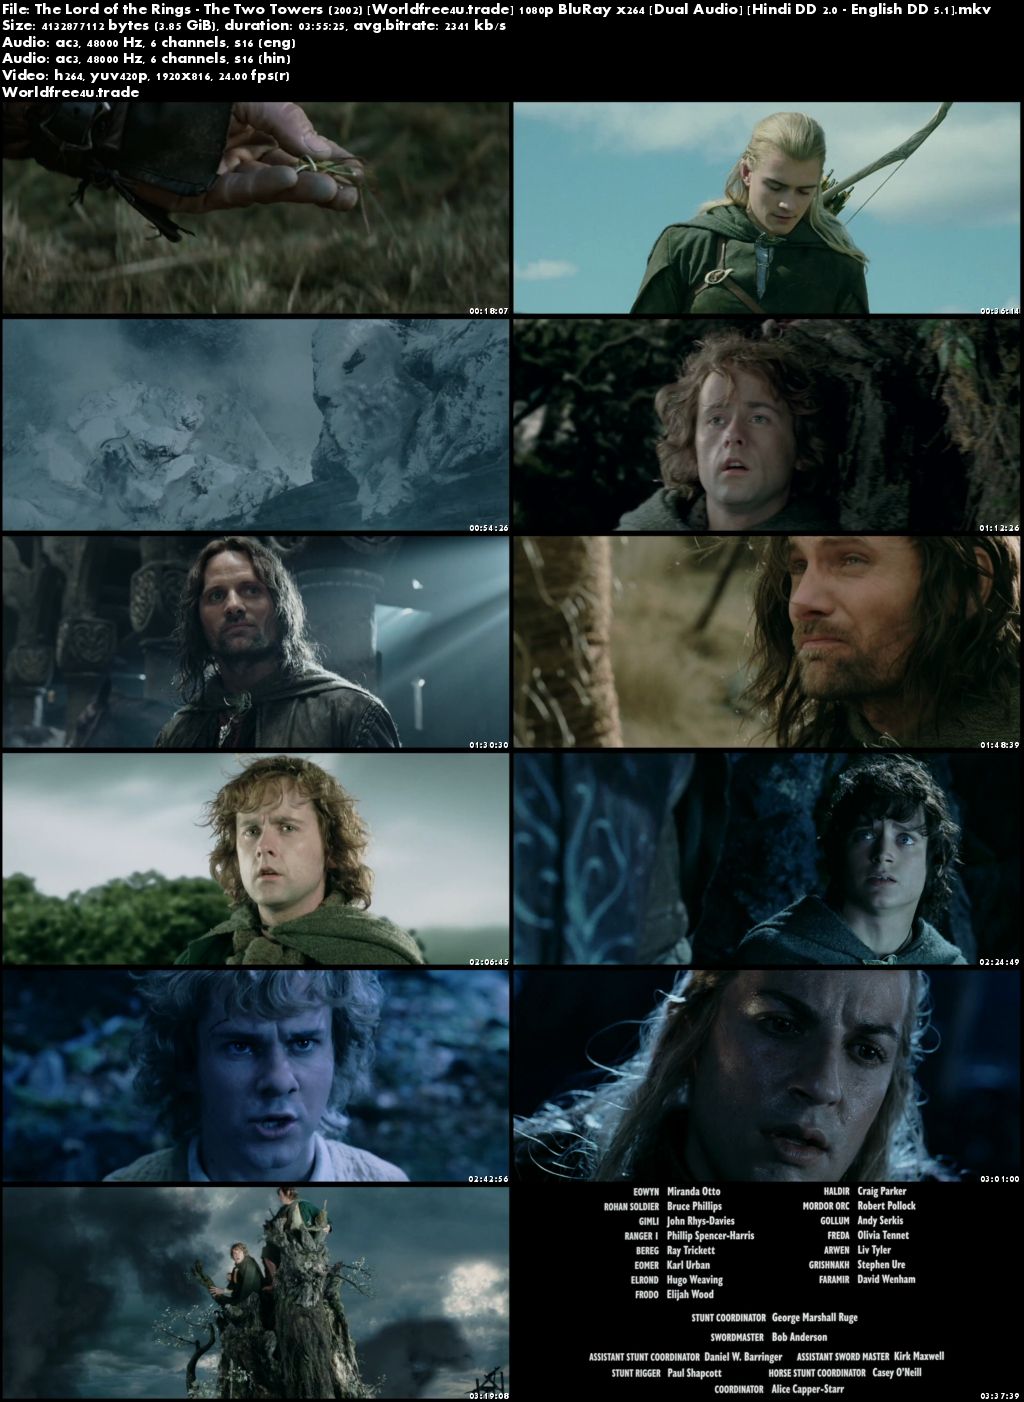 index of the lord of the rings: the two towers 1080p